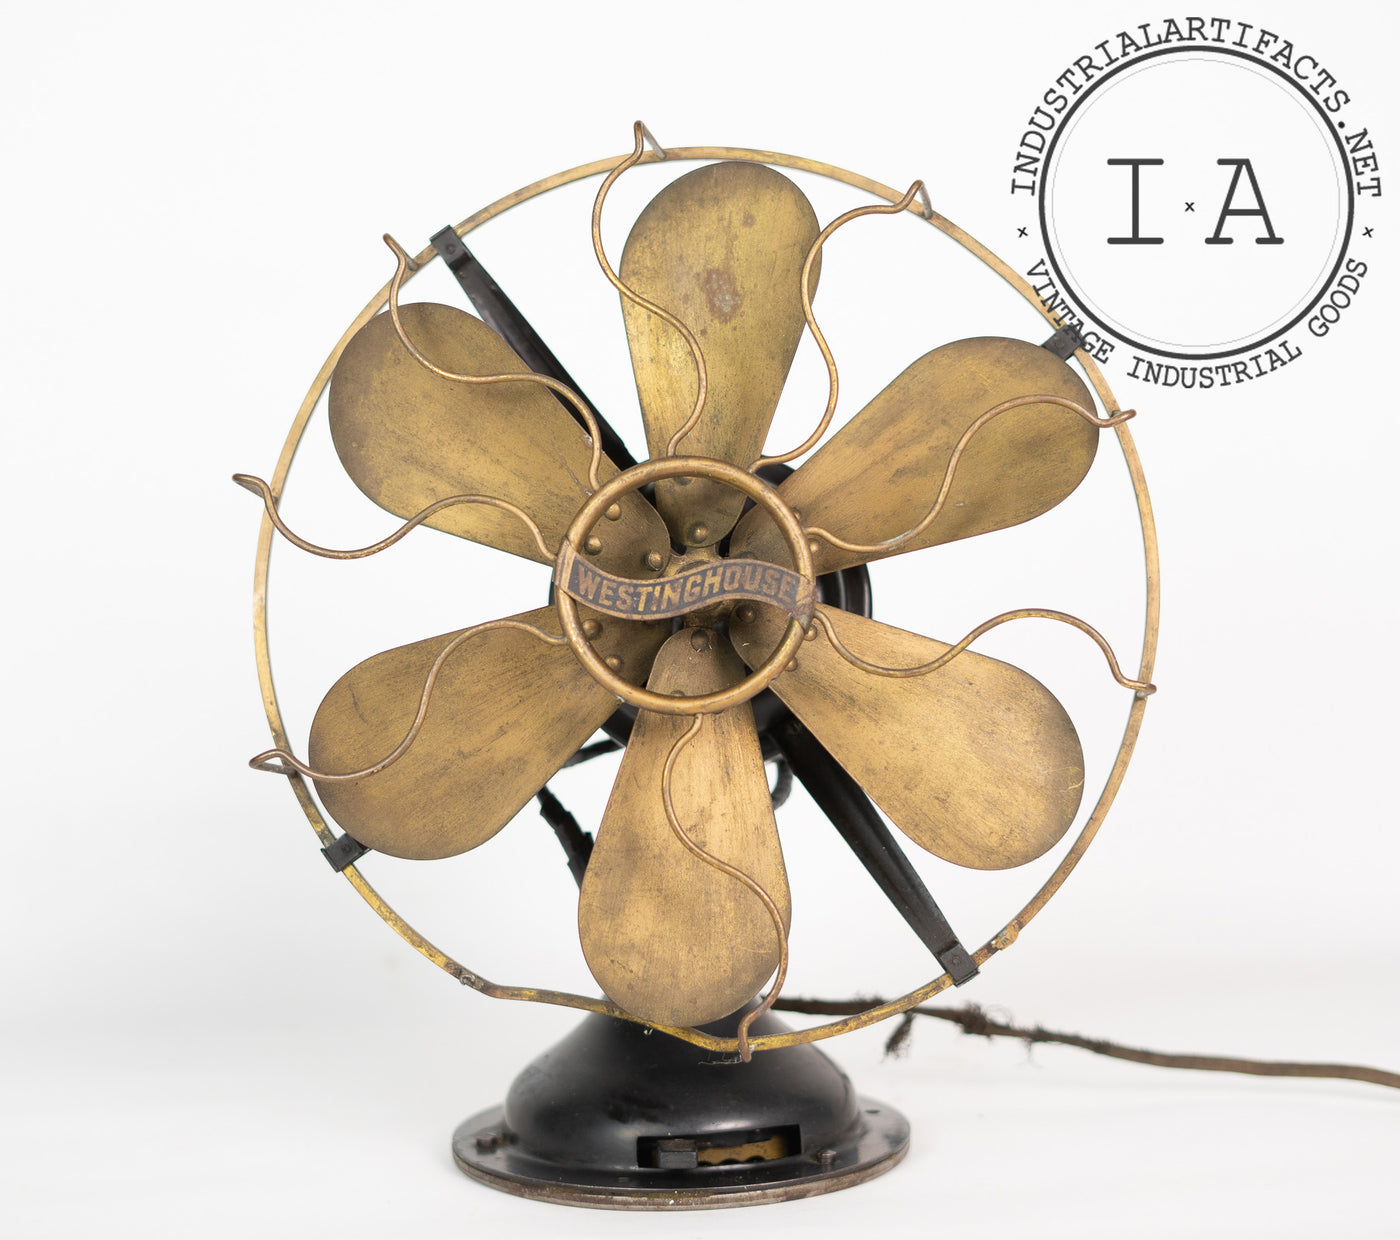 C. 1920 Articulating Fan by Westinghouse